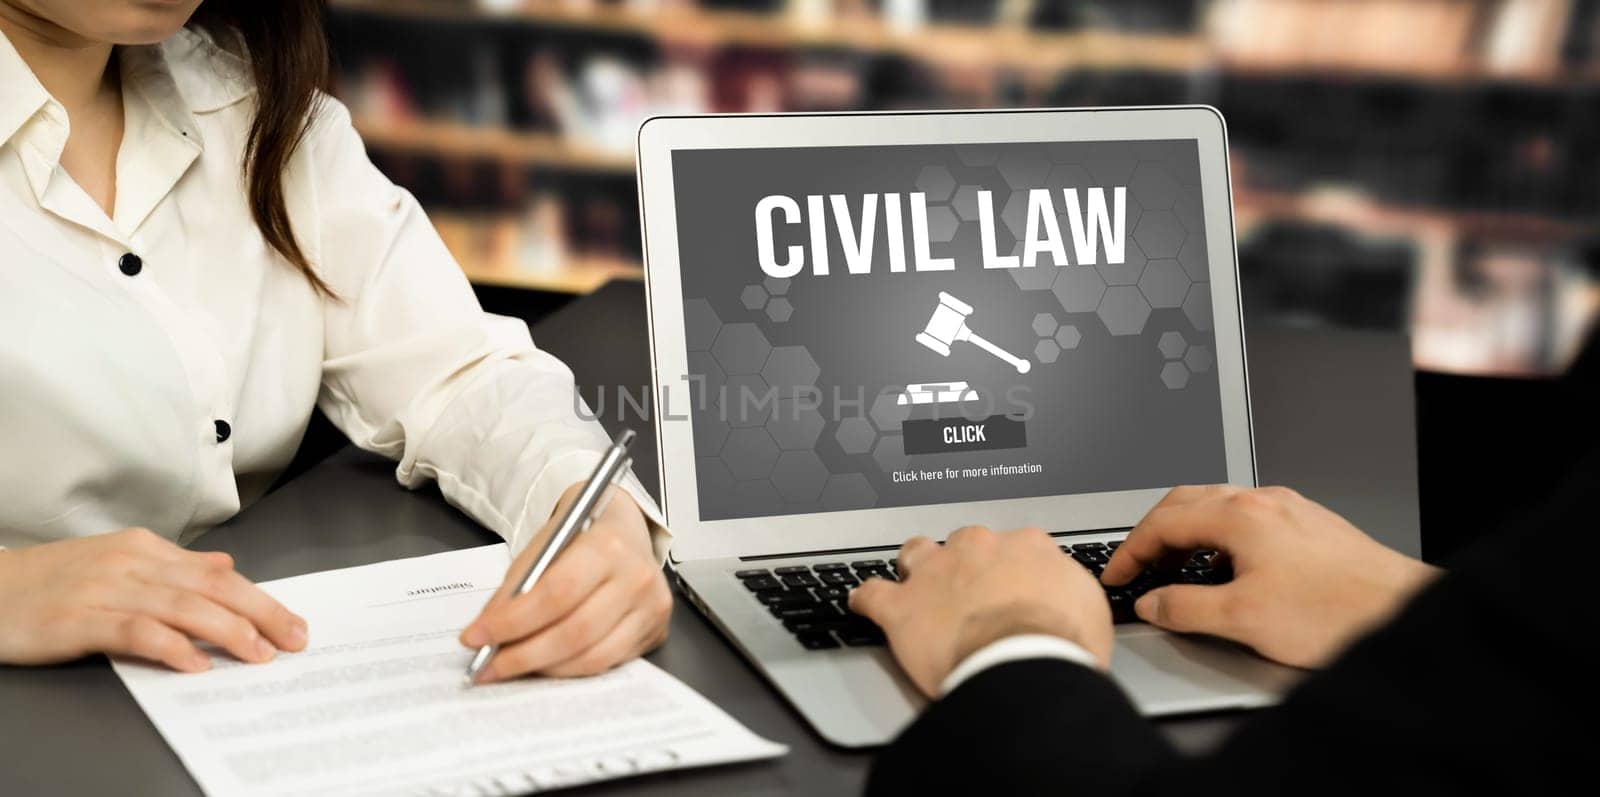 Civil law astute information showing on laptop computer screen by biancoblue